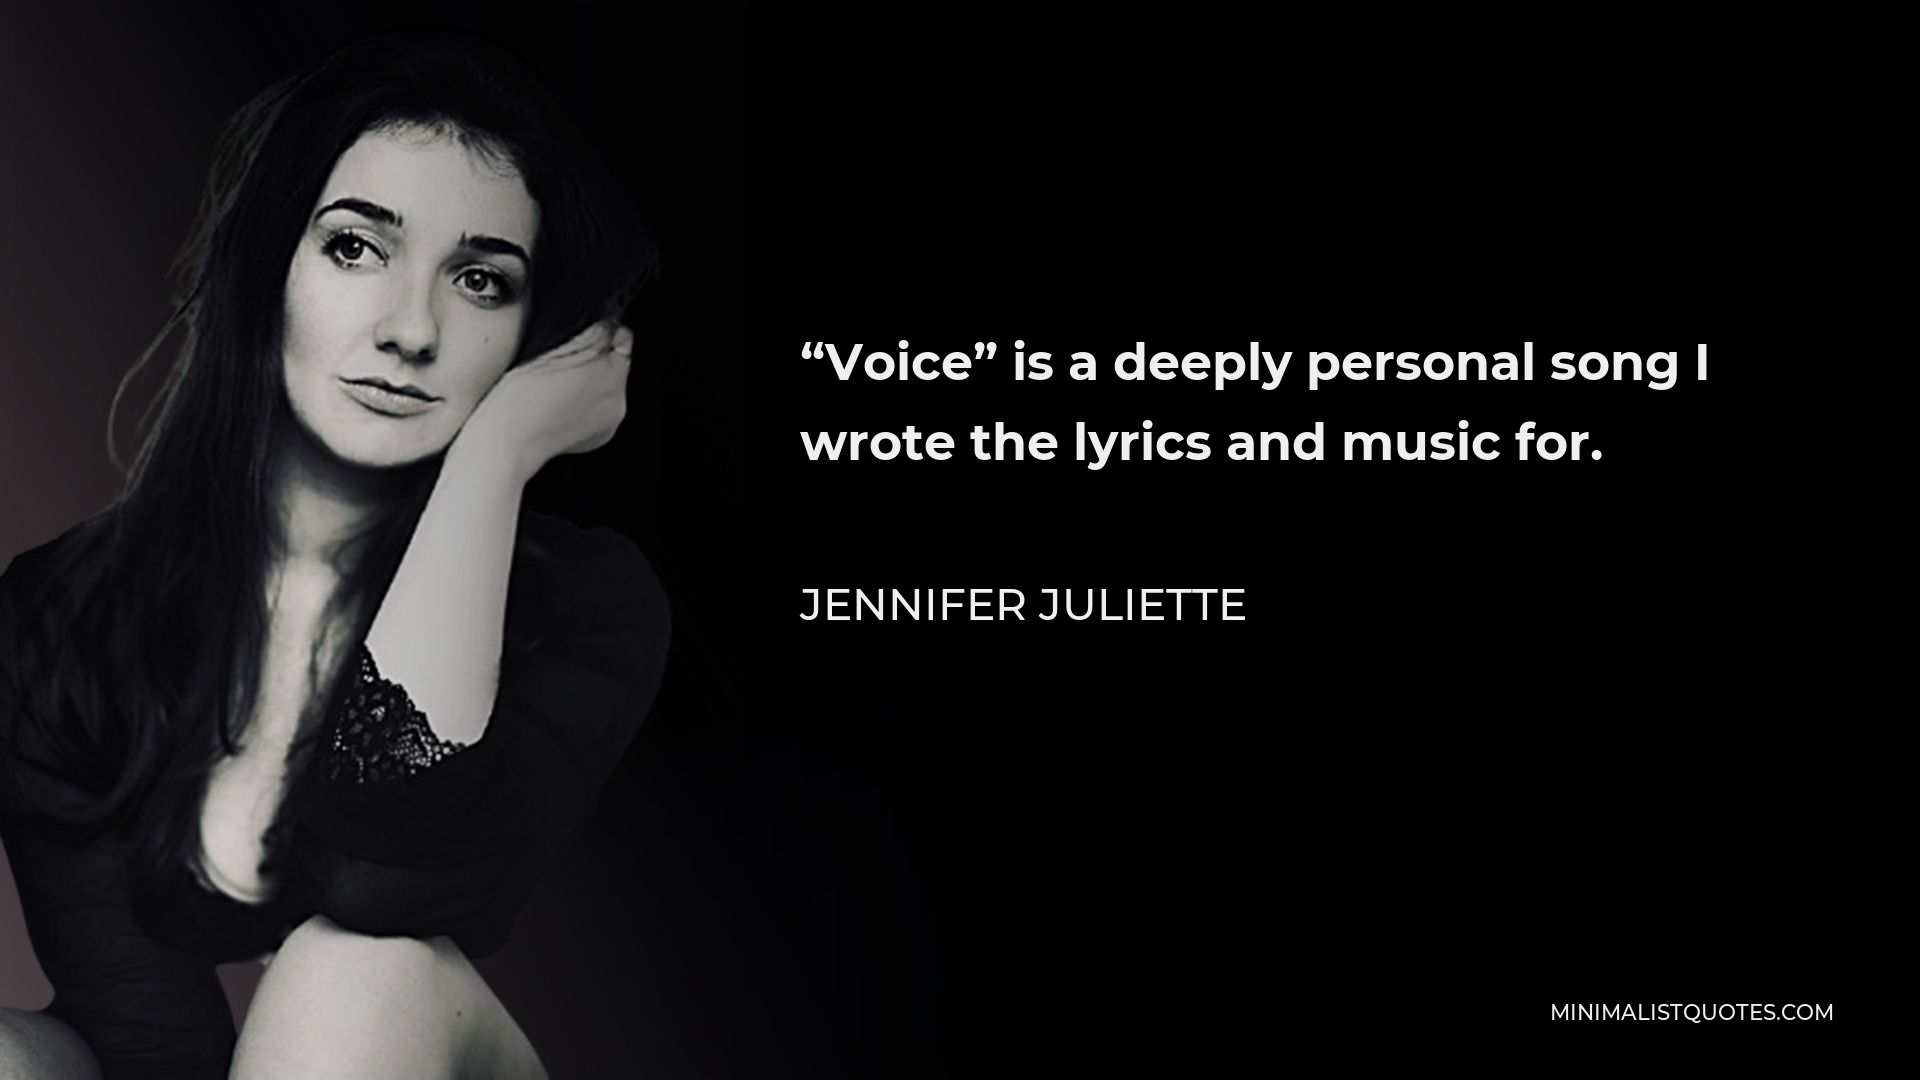 Jennifer Juliette Quote - “Small Voice” is a deeply personal song I wrote the lyrics and music for.